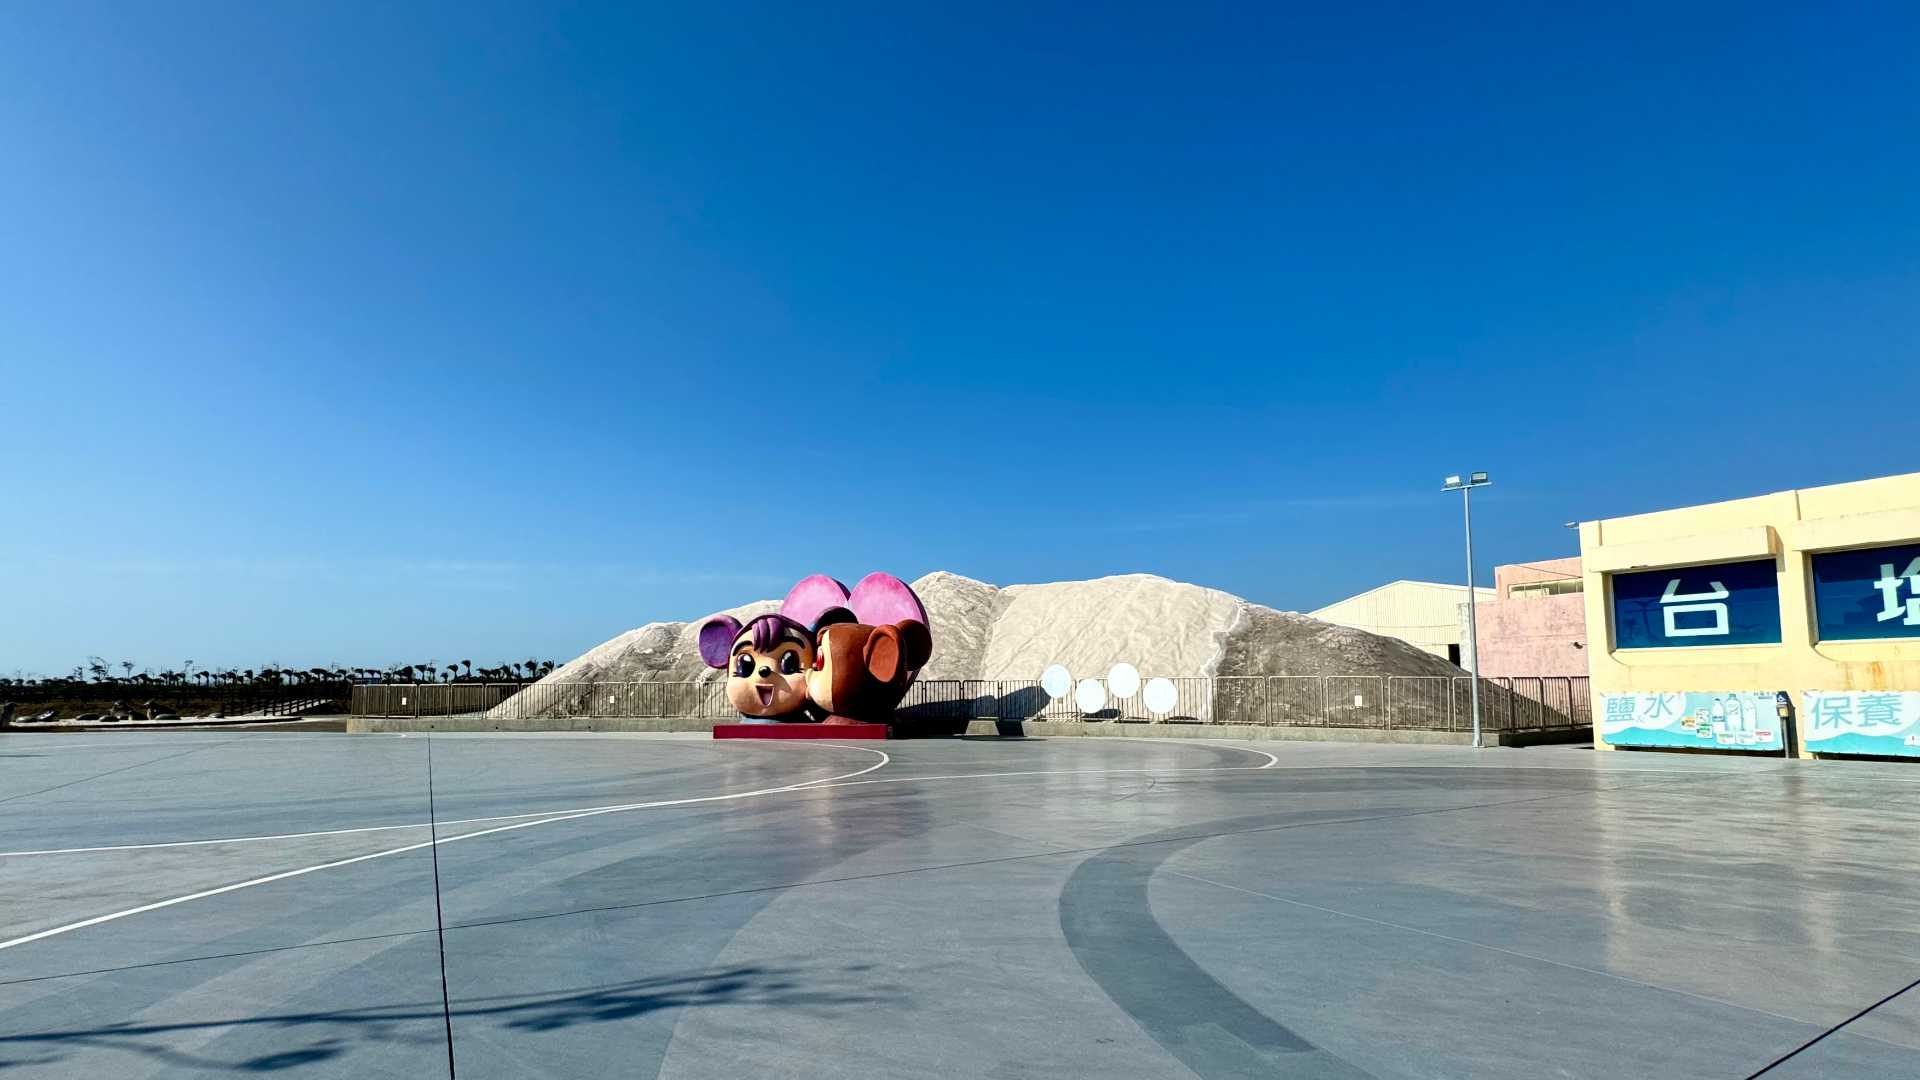 A large pile of salt on the far side of a carpark. The sale pile is maybe 2 stories tall and behind a low fence. In front of the fence are two human-size cartoonish sculptures of mouse-like creatures in love.